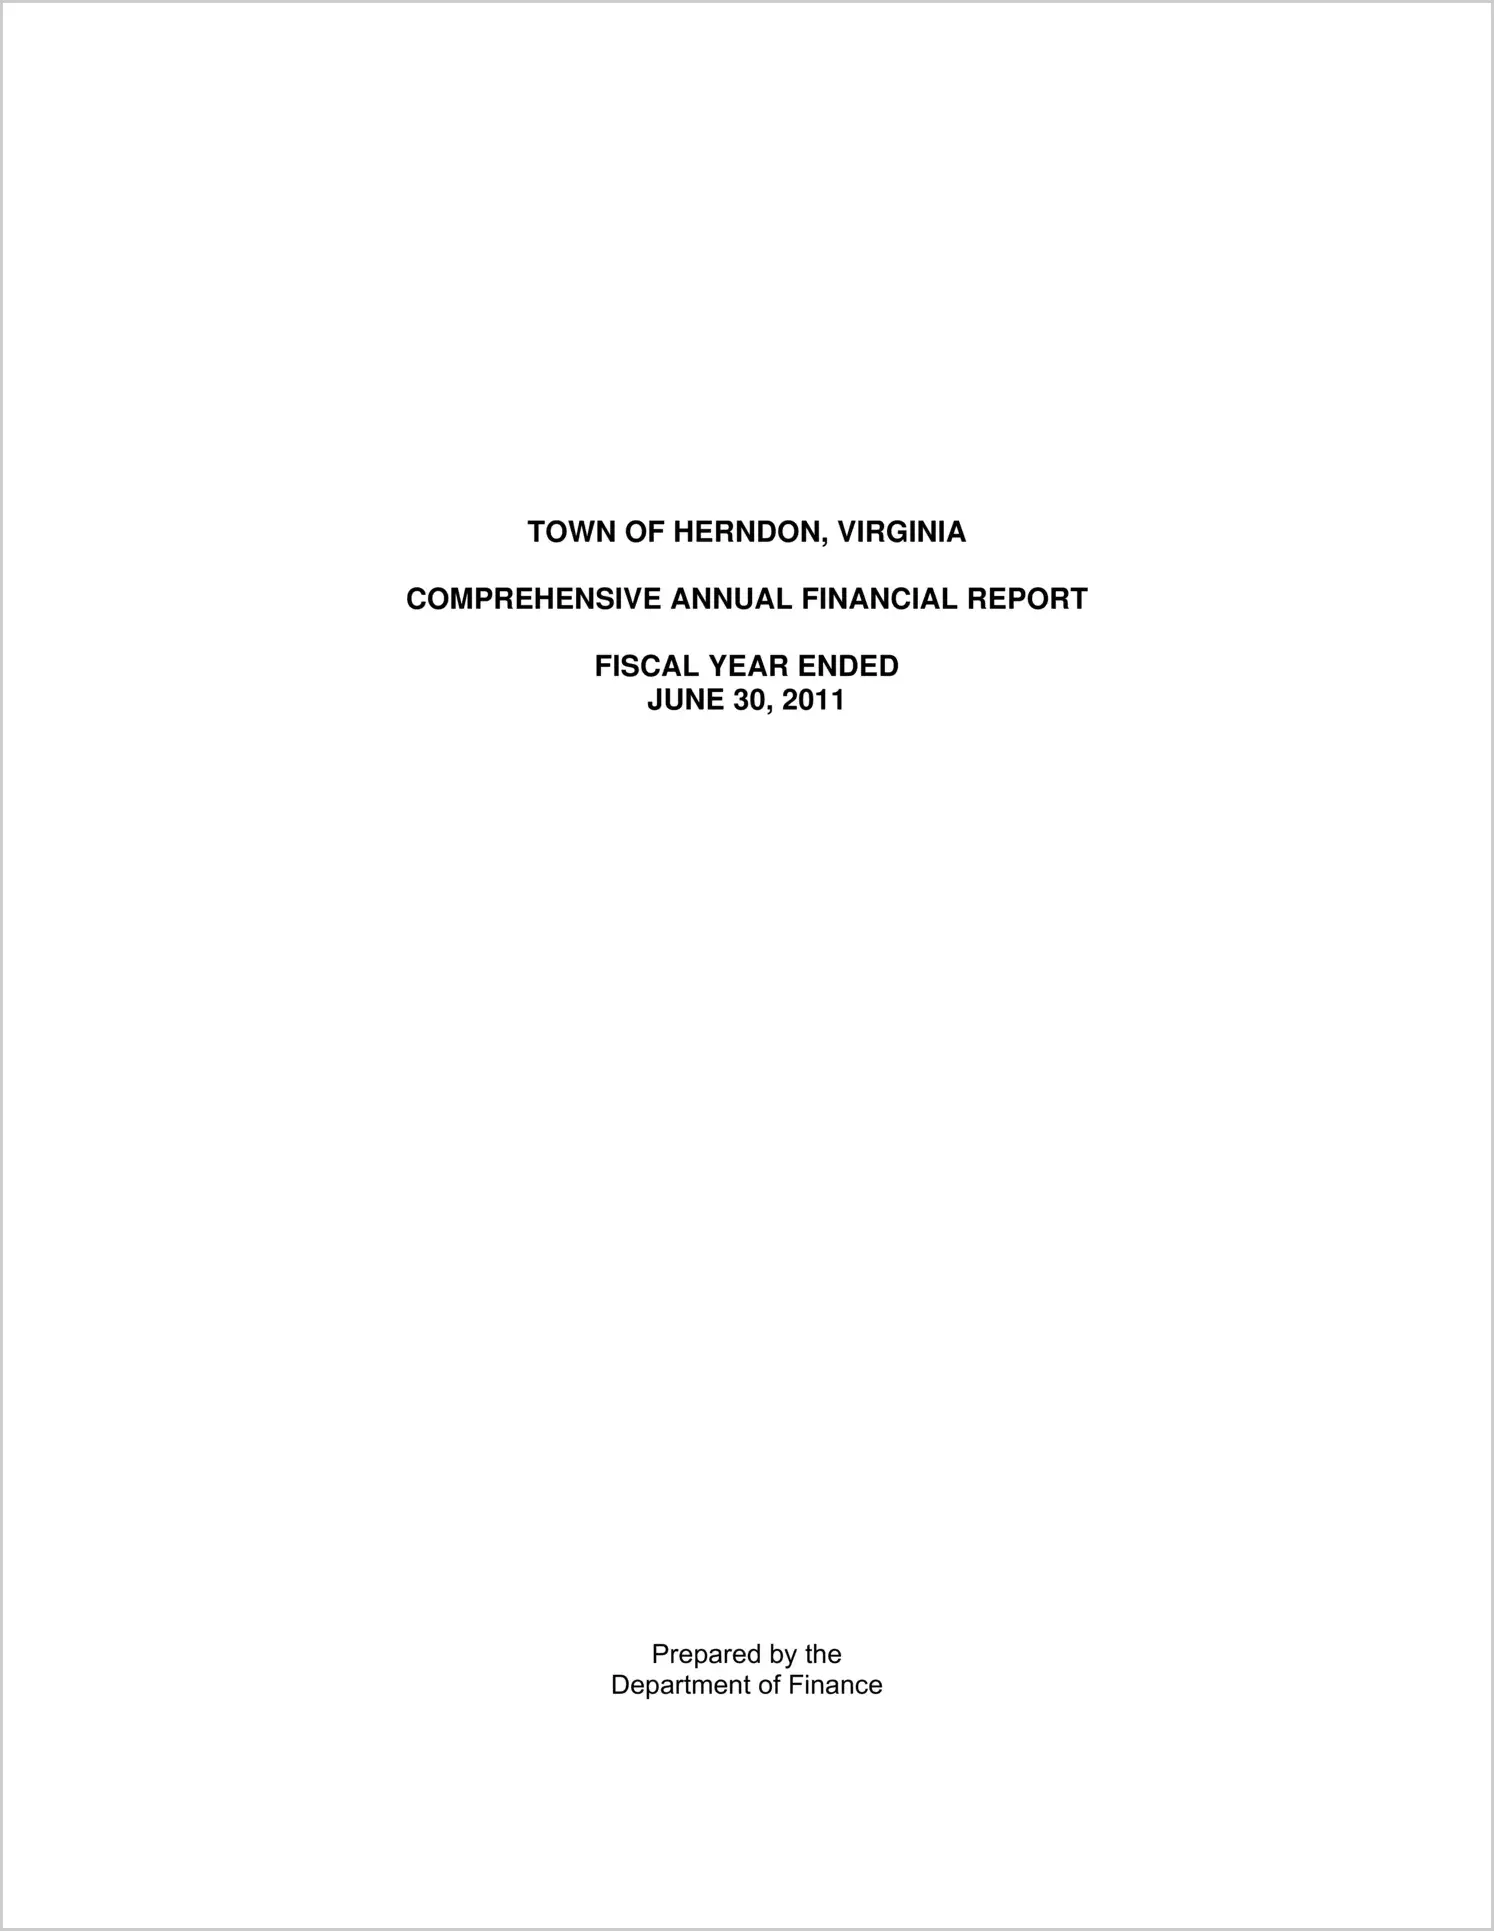 2011 Annual Financial Report for Town of Herndon